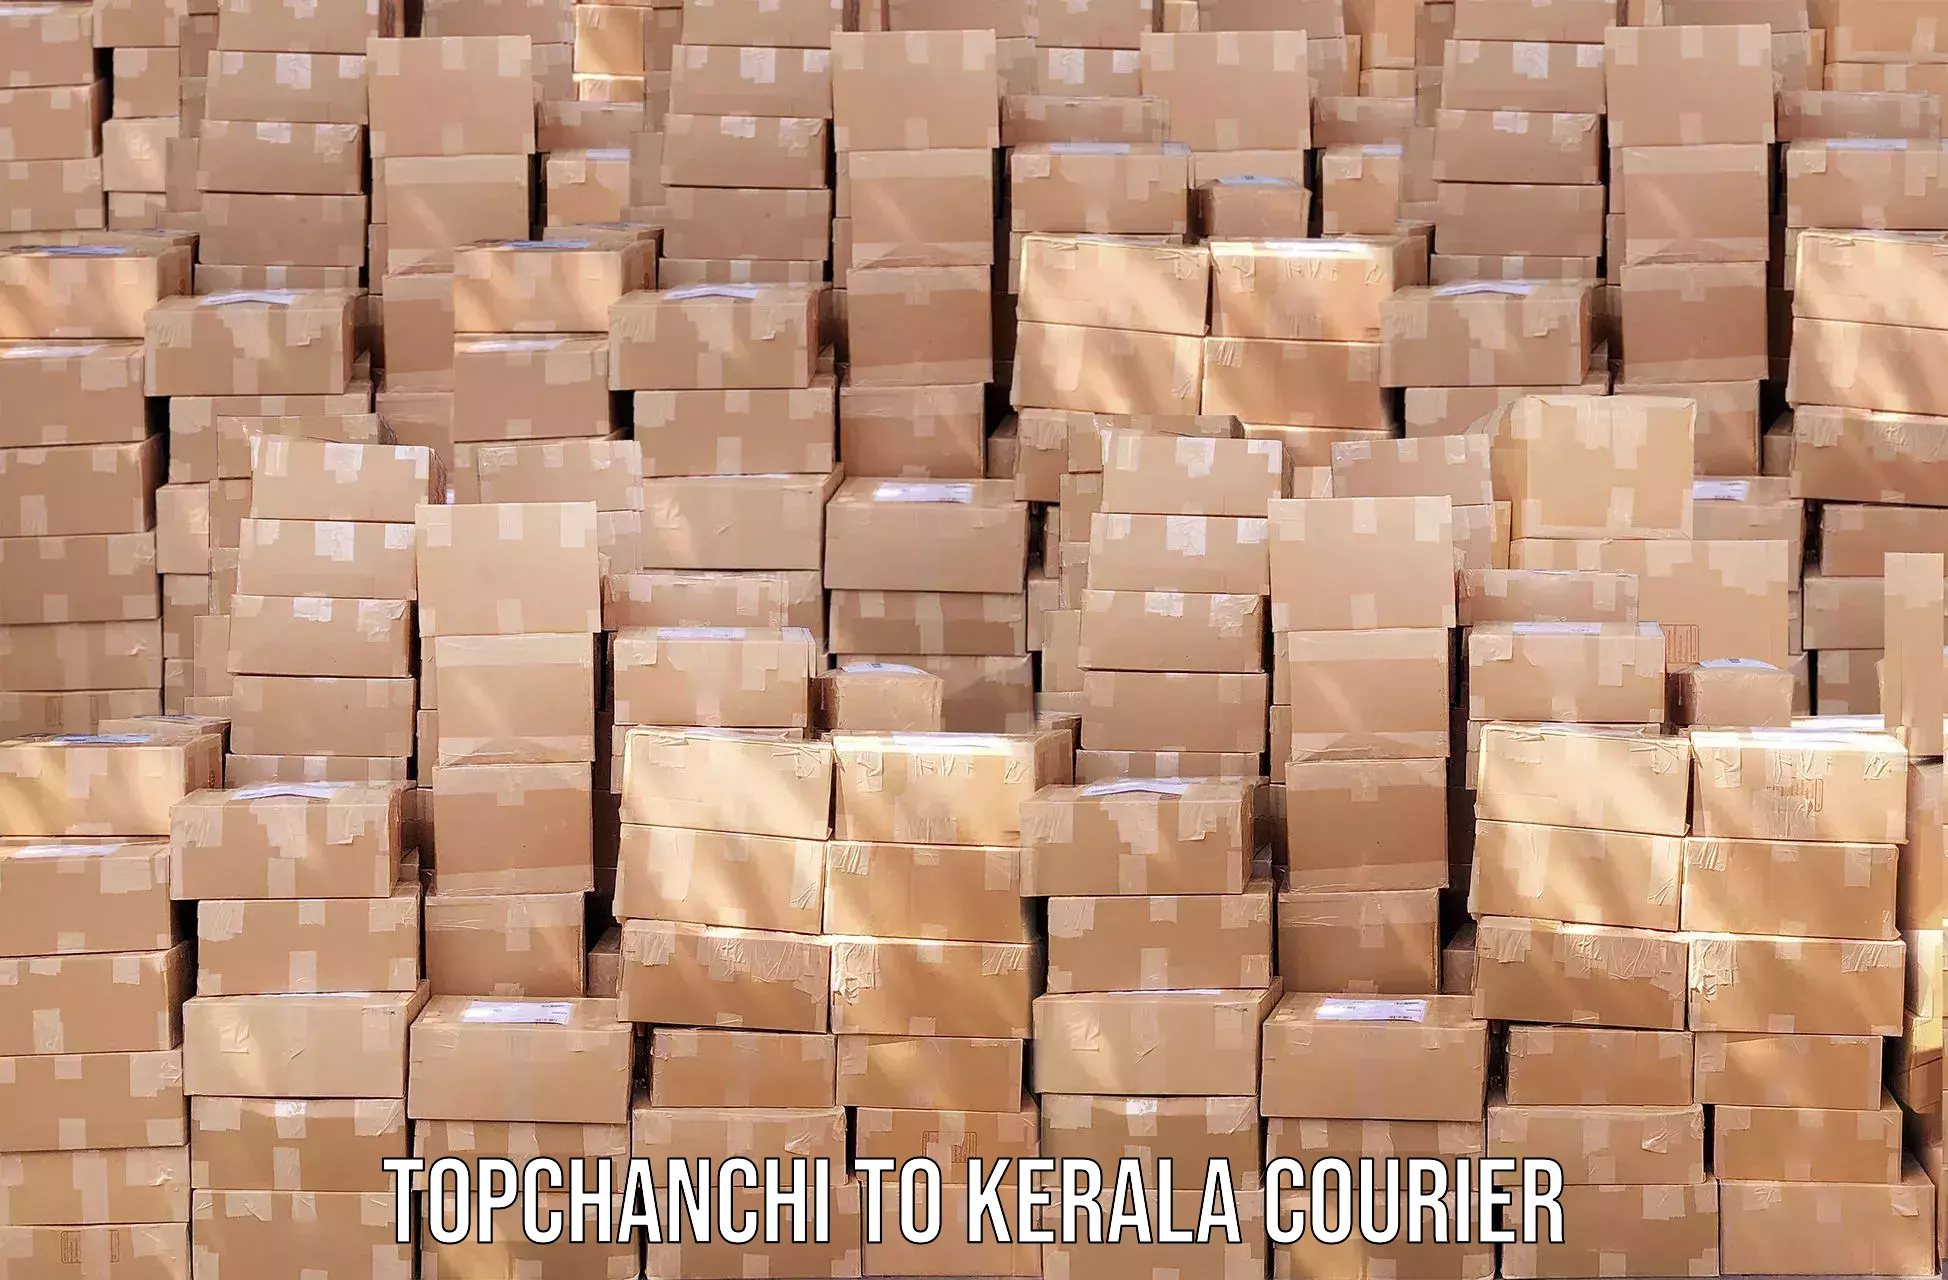 Courier service comparison Topchanchi to Kumily